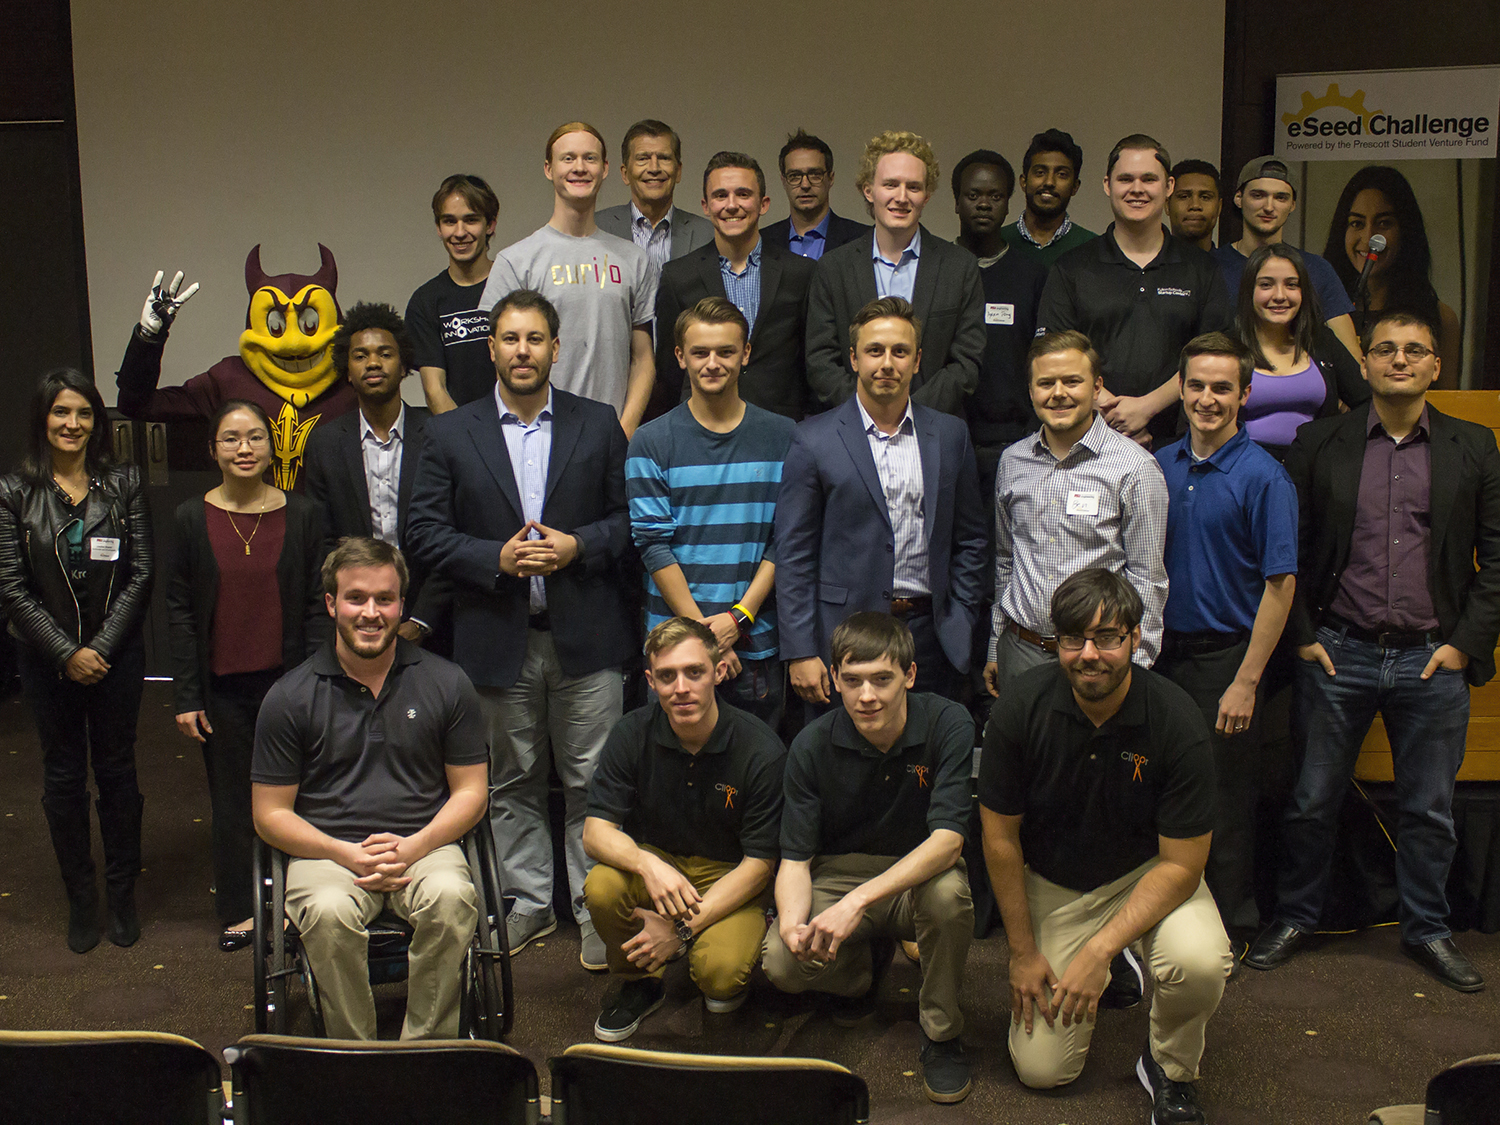 The second cohort of student-led ventures from the eSeed Challenge + Accelerator pose for a photo with event judges at eSeed Demo Day, November 30, 2016 ASU's Memorial Union on the Tempe Campus. Photographer: Marco-Alexis Chaira/ASU